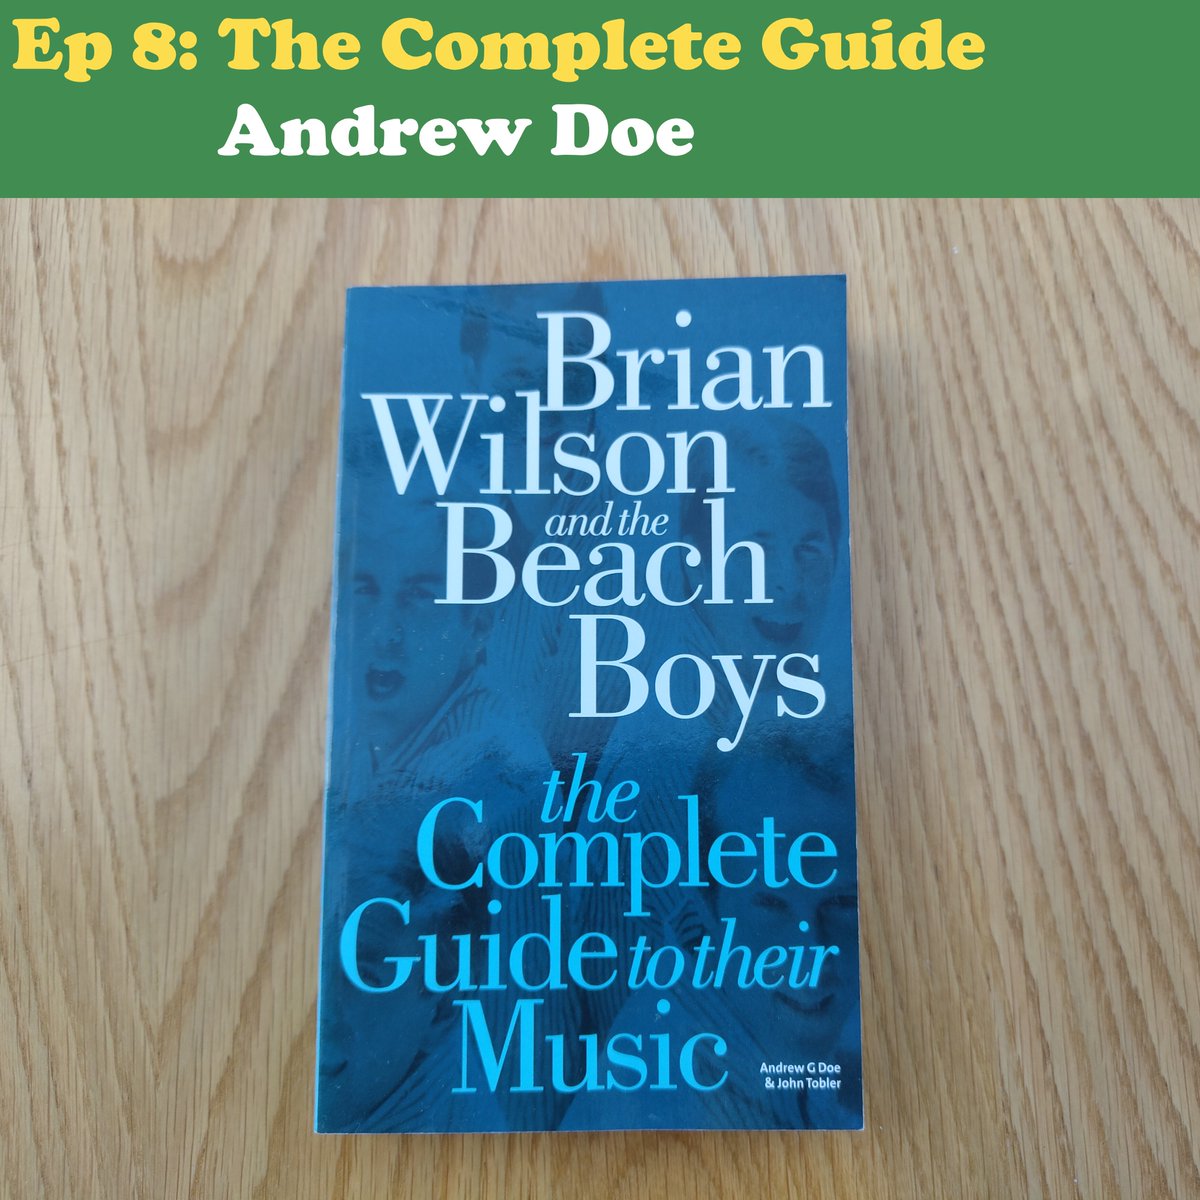 Episode 8 is out now!

This episode is a terrific chat with Andrew Doe, covering this tremendous book, the Bellagio website he curates and all of the names in the Beach Boys world he knows and has met!

#thebeachboys #musicbook #musicbooks #musicbookclub